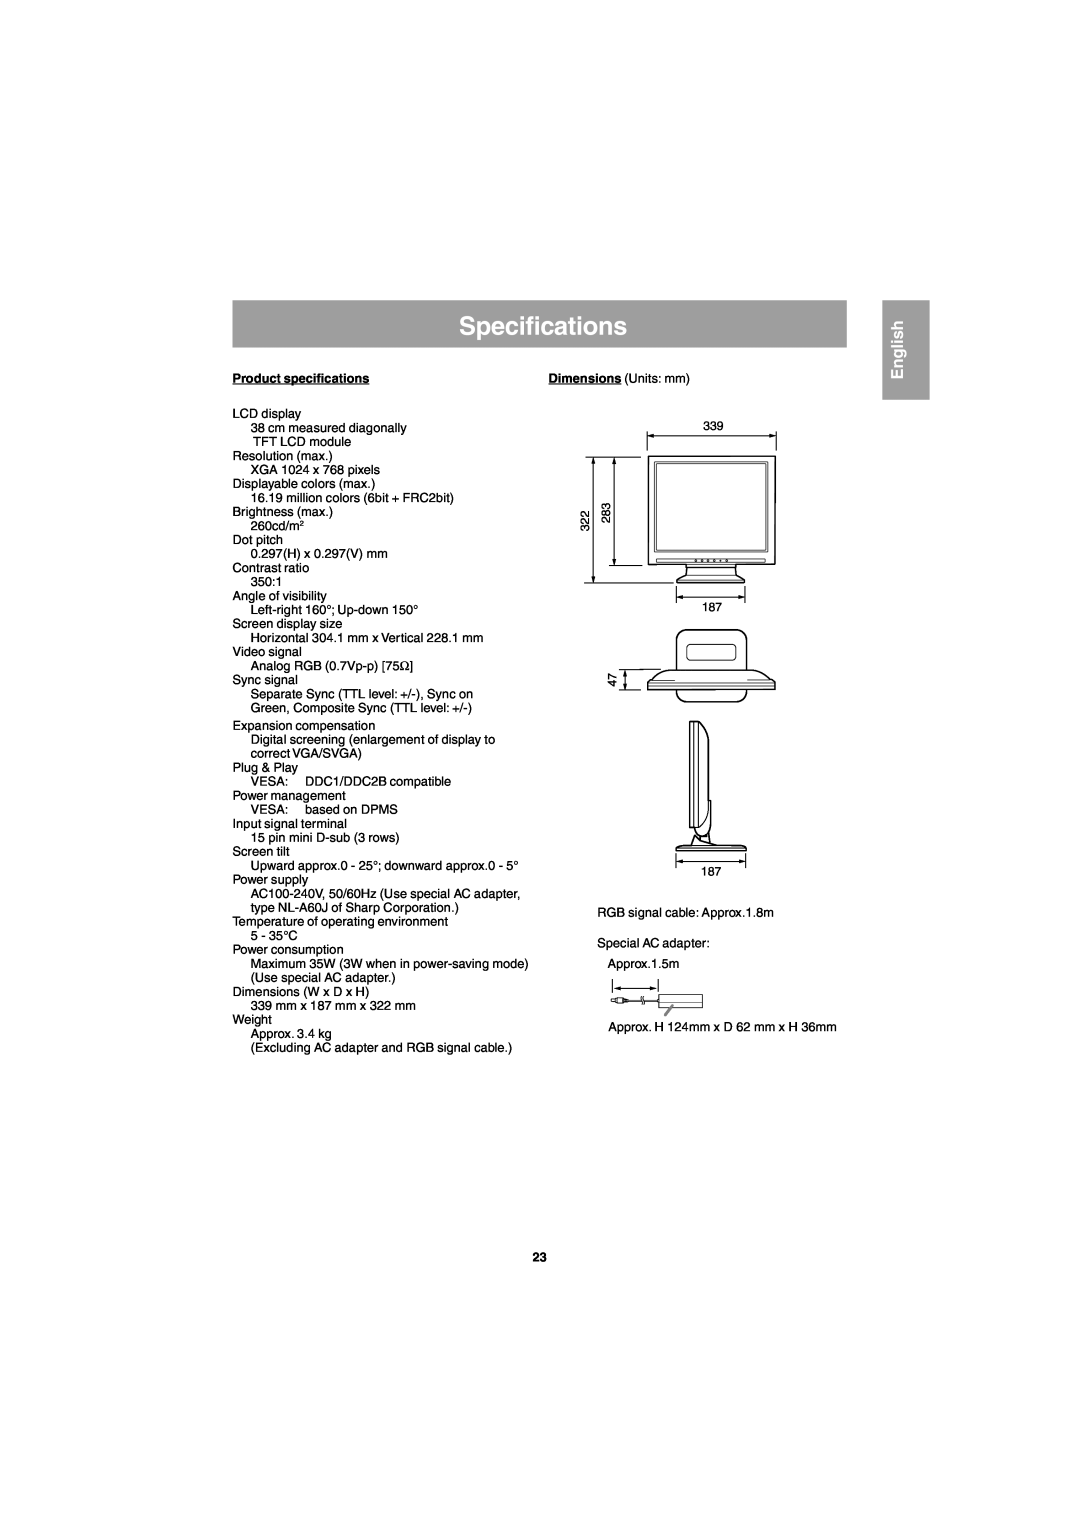 Sharp LL-E15G1, LL-T15G1 operation manual Specifications, Product specifications, Dimensions Units mm, English 